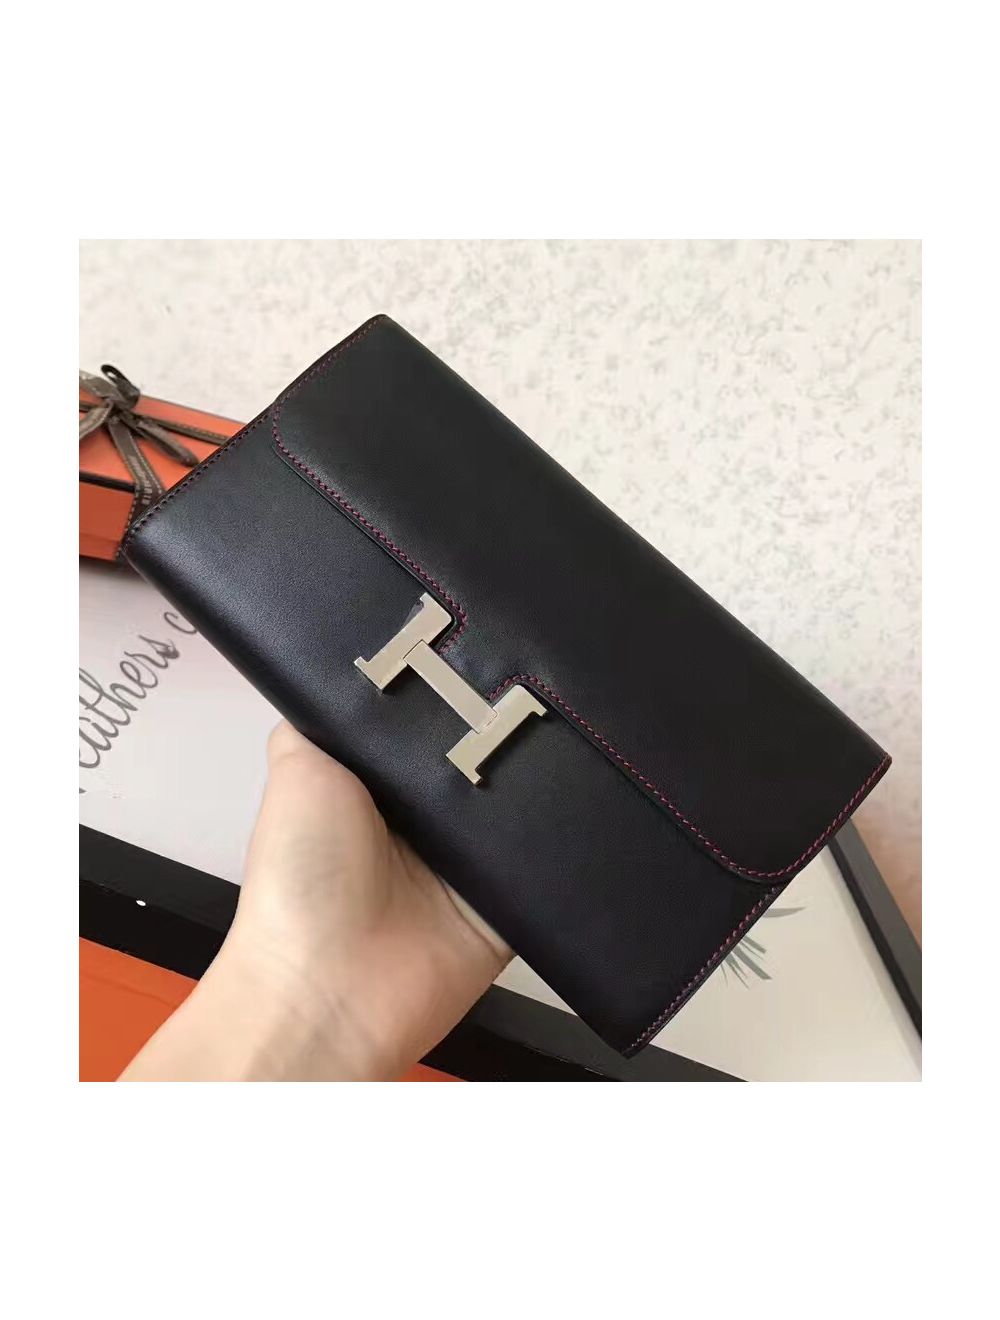 Replica Hermes Dogon Duo Wallet In Black Clemence Leather